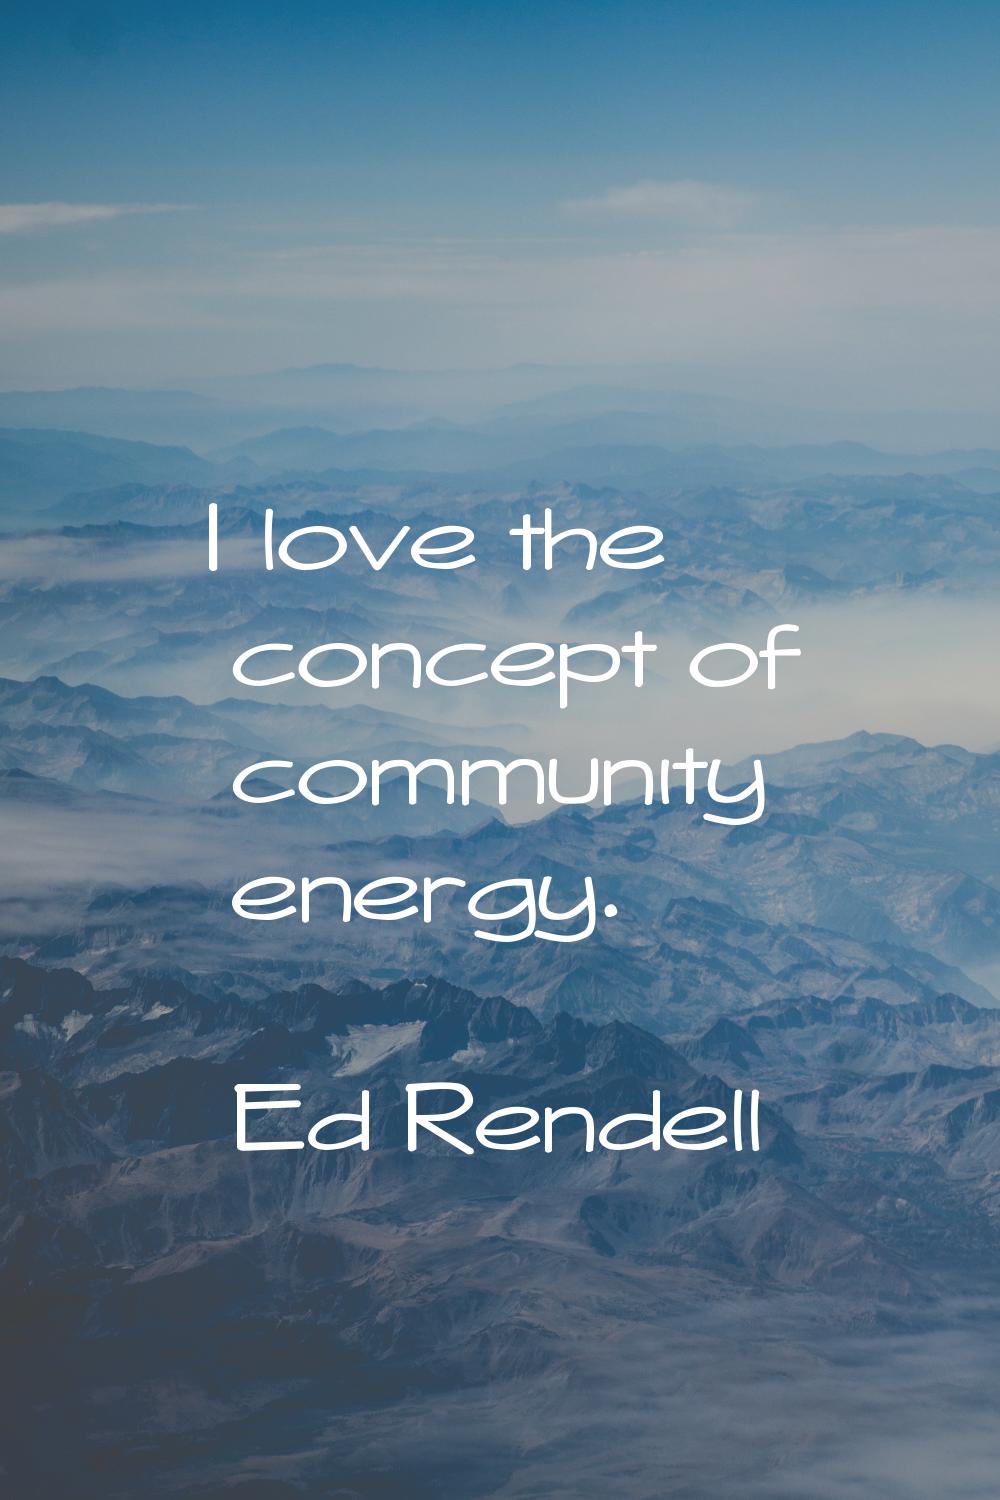 I love the concept of community energy.